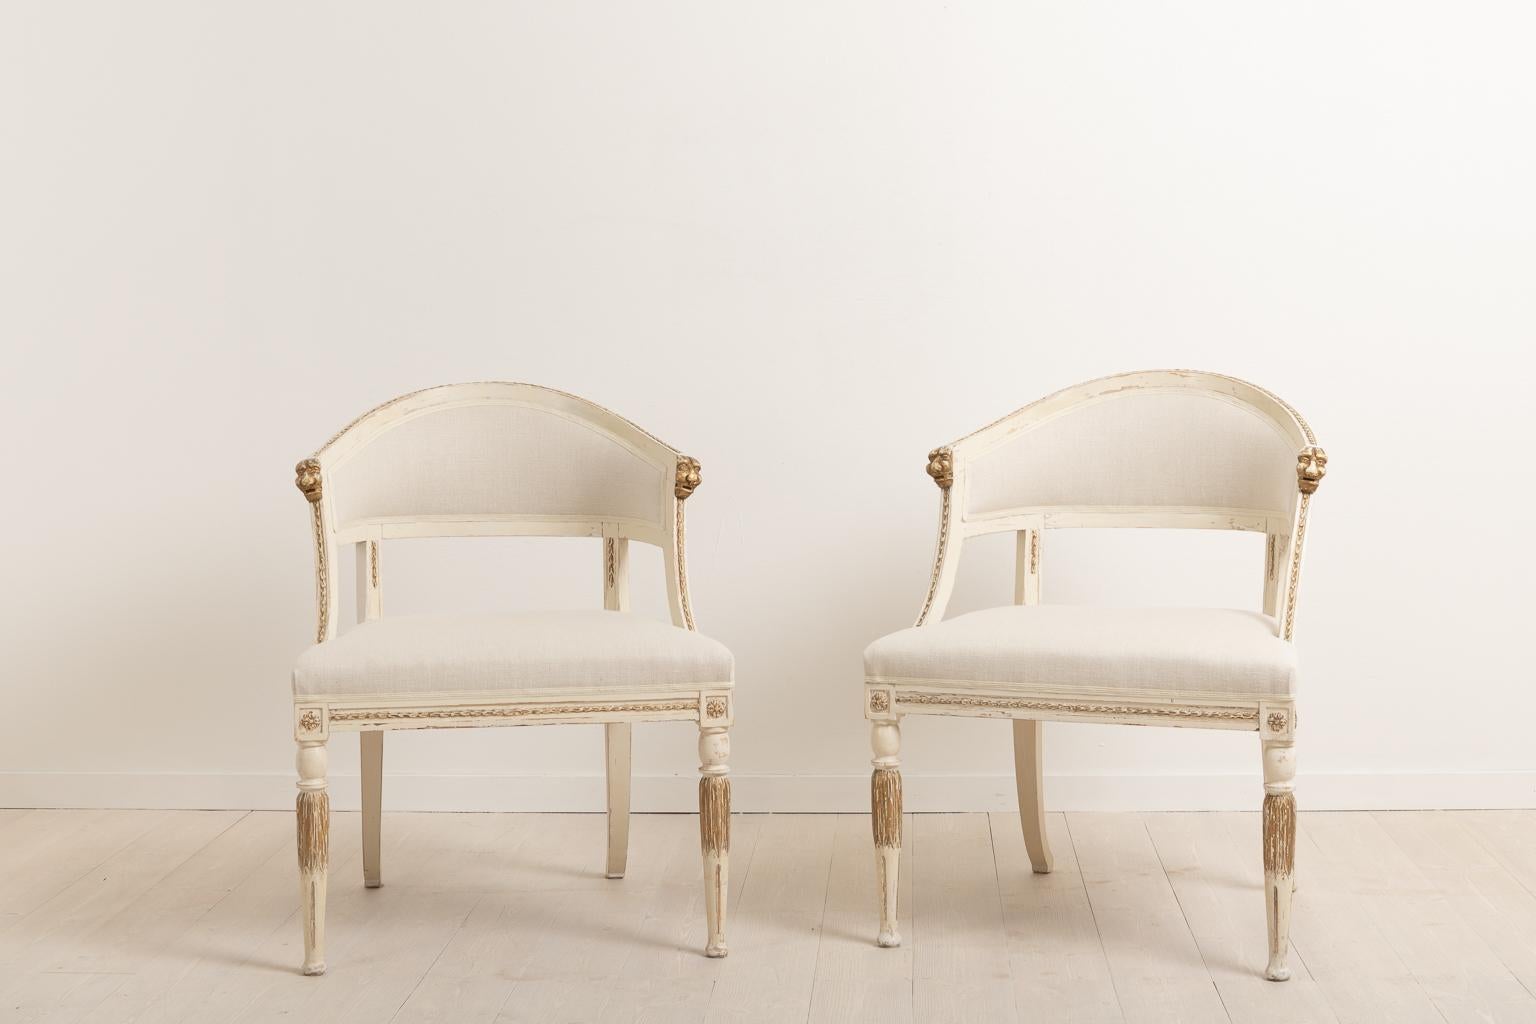 Set of two barrel back armchairs with renovated seats. The armchairs have renovated padding and have been upholstered with new fabric. Manufactured in northern Sweden circa 1880 the chairs are made in the Gustavian style, a style popular in Sweden